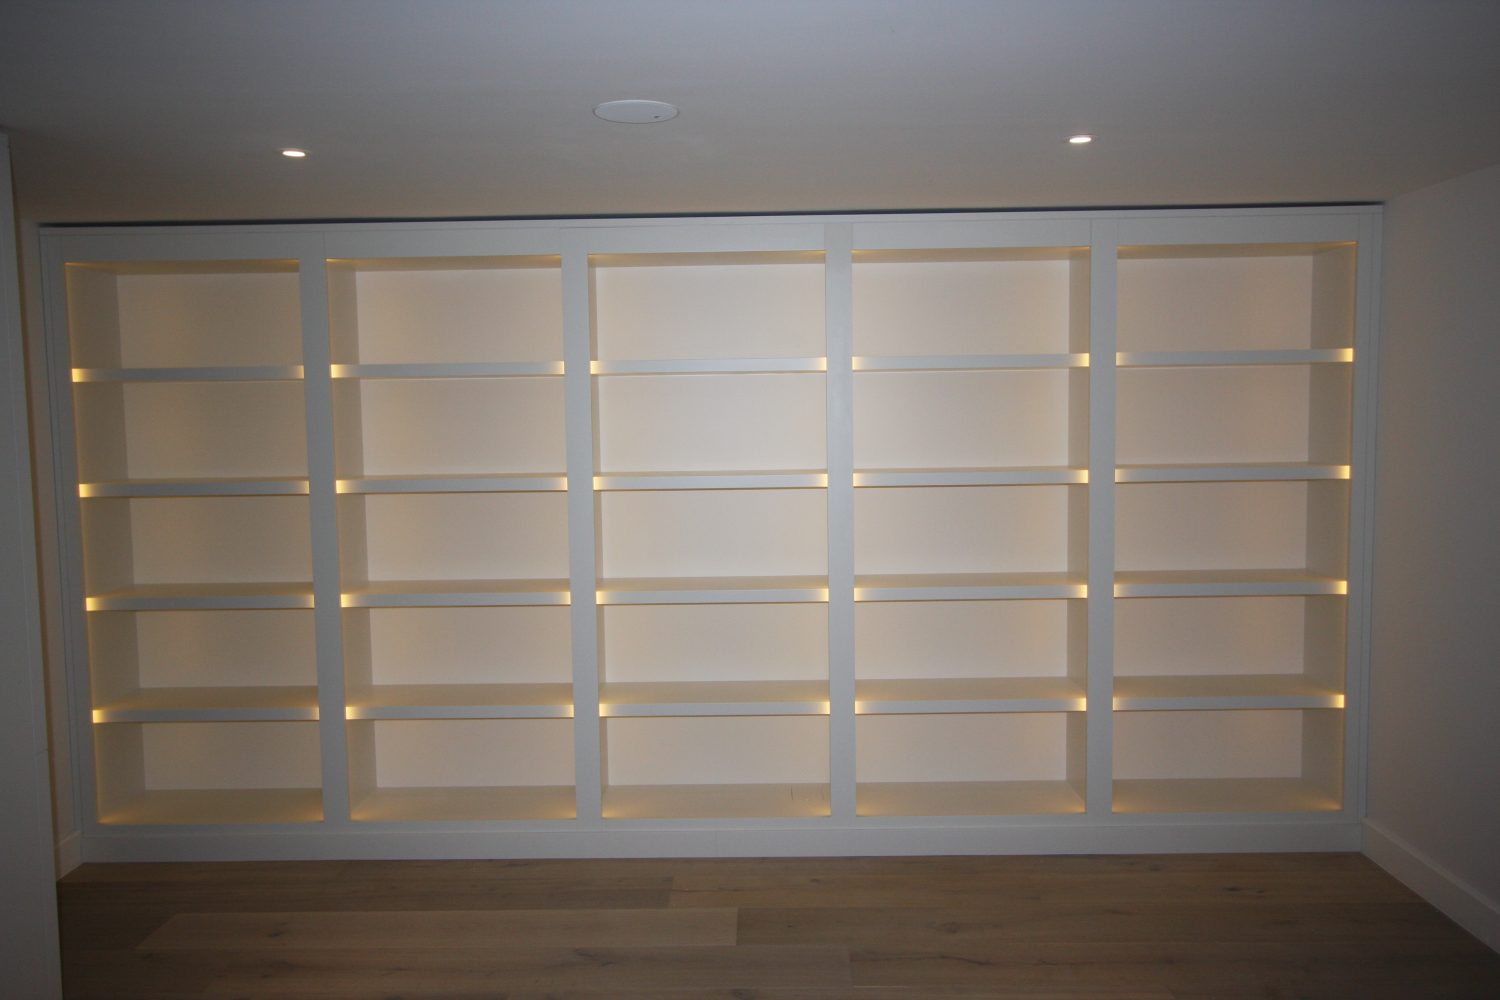 Fixed Shelf Bookcase with 50mm Thick Shelves